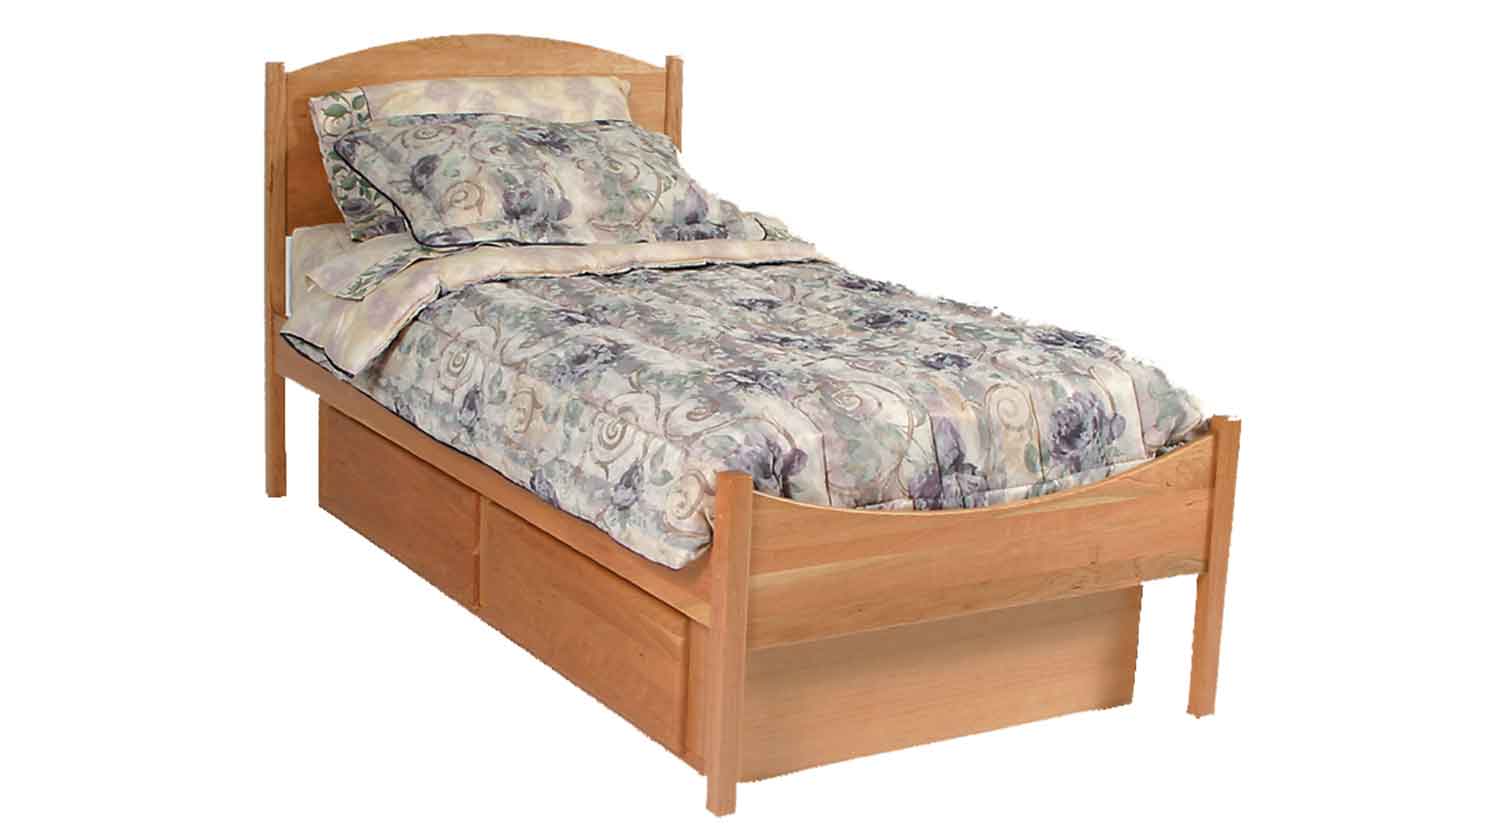 Circle Furniture Woodforms Shaker Bed, Cherry Twin Bed Frame